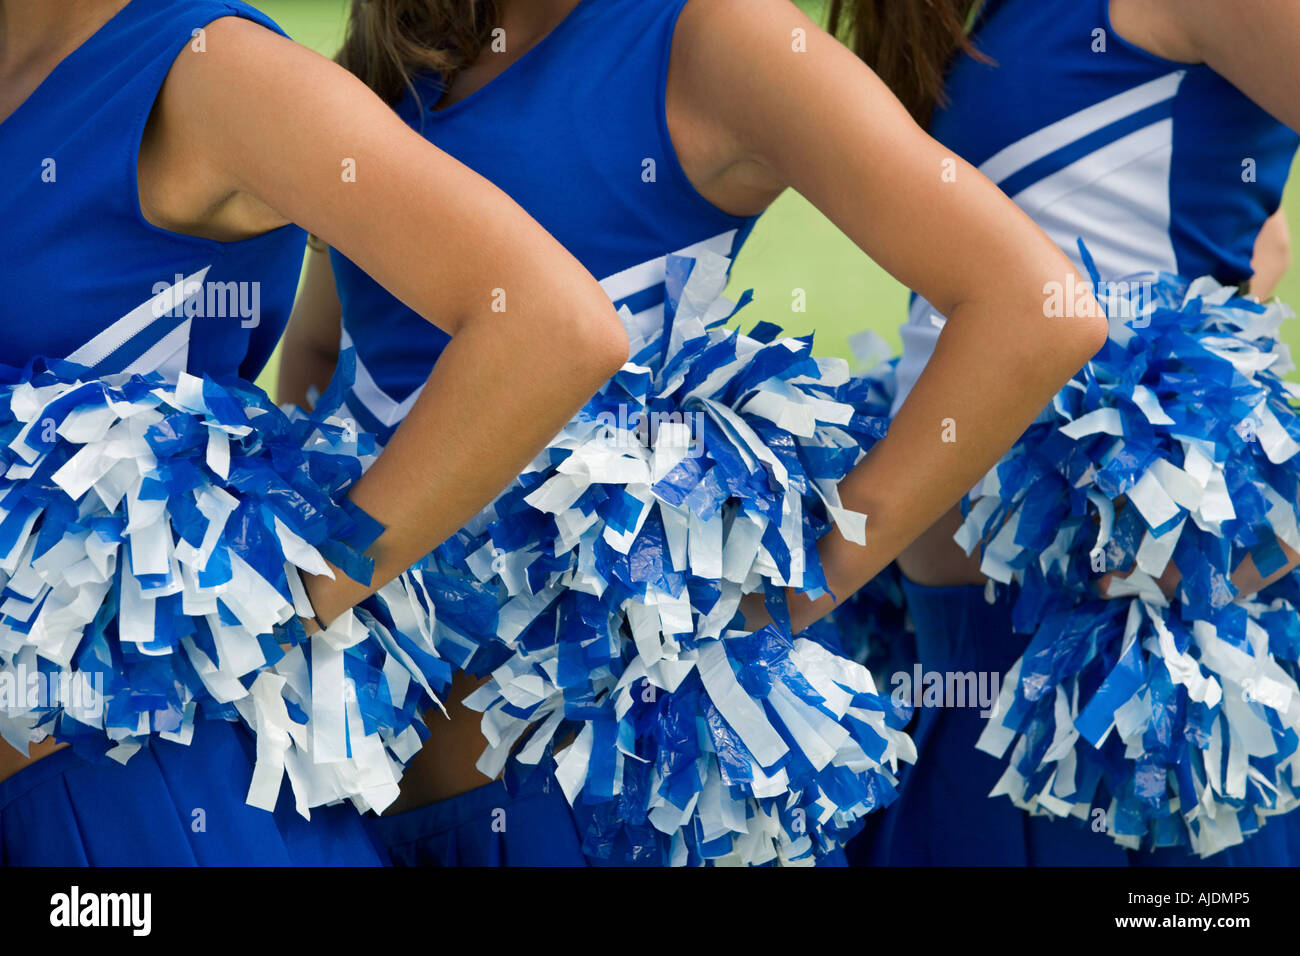 Cheerleaders holding pom-poms, (mid section), (close-up) Stock Photo